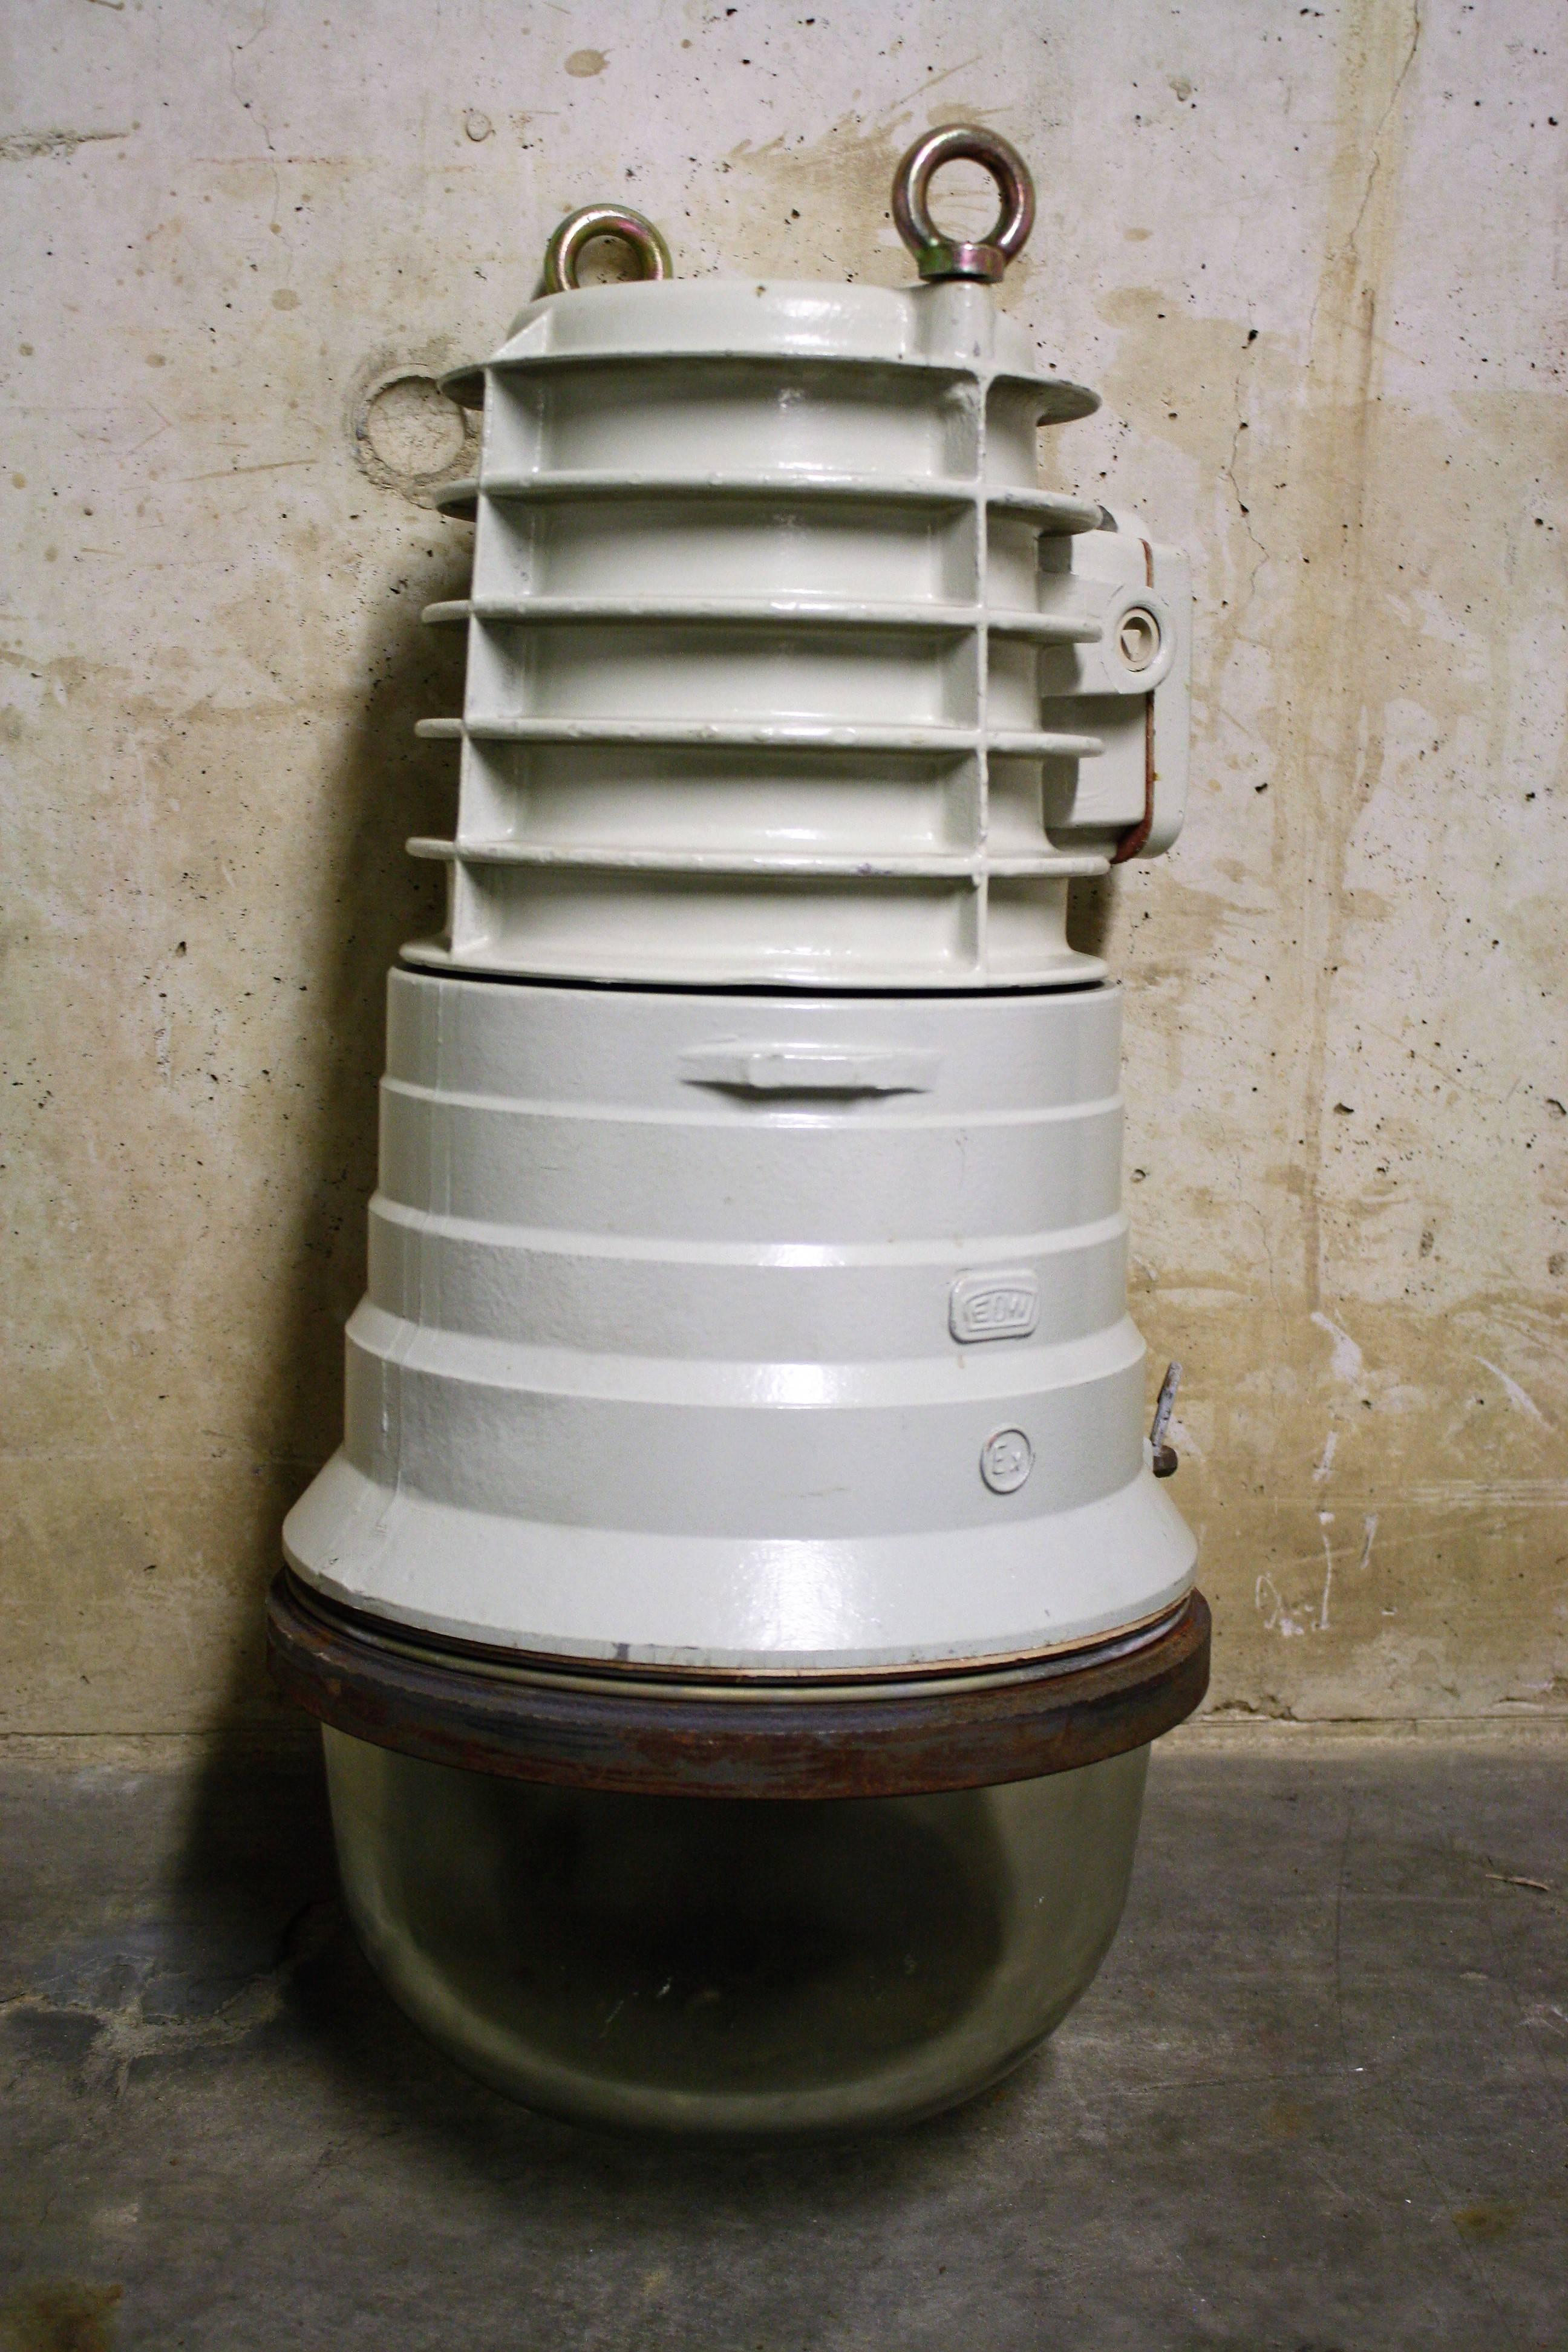 Large grey Industrial explosion proof bully lamp, marked EOB, a German manufacturer of Industrial lamps.

The lamp is made from cast iron and very strong glass.

This huge German lamp was used in chemical industry. They are purpose built so they